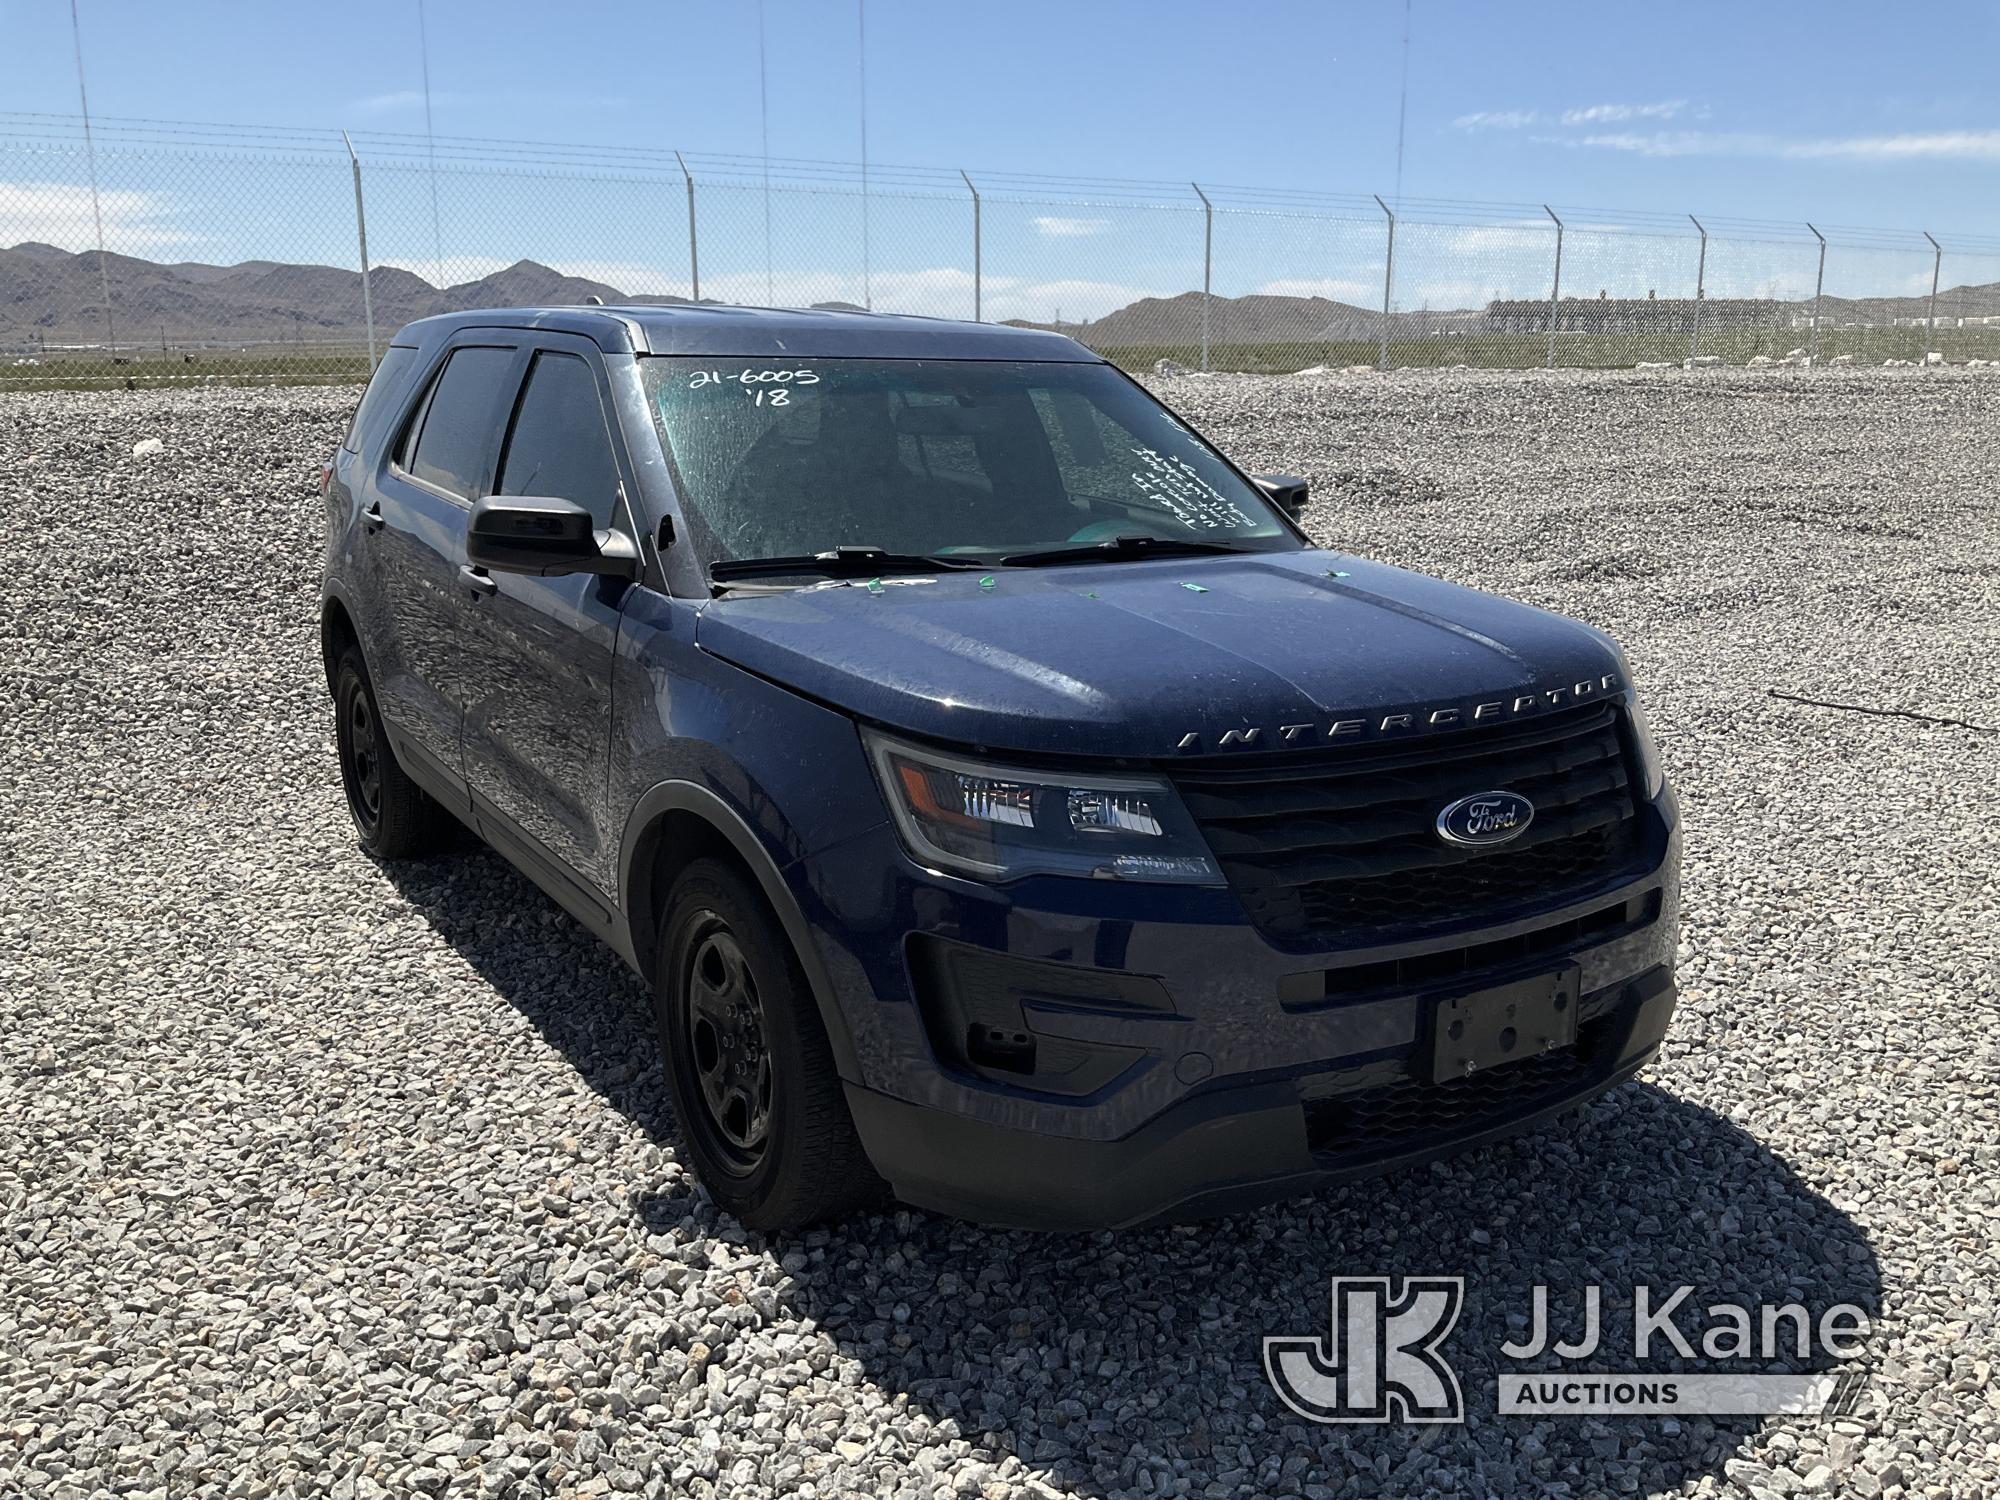 (Las Vegas, NV) 2018 Ford Explorer AWD Police Interceptor Towed In, No Console Body Damage, Does Not